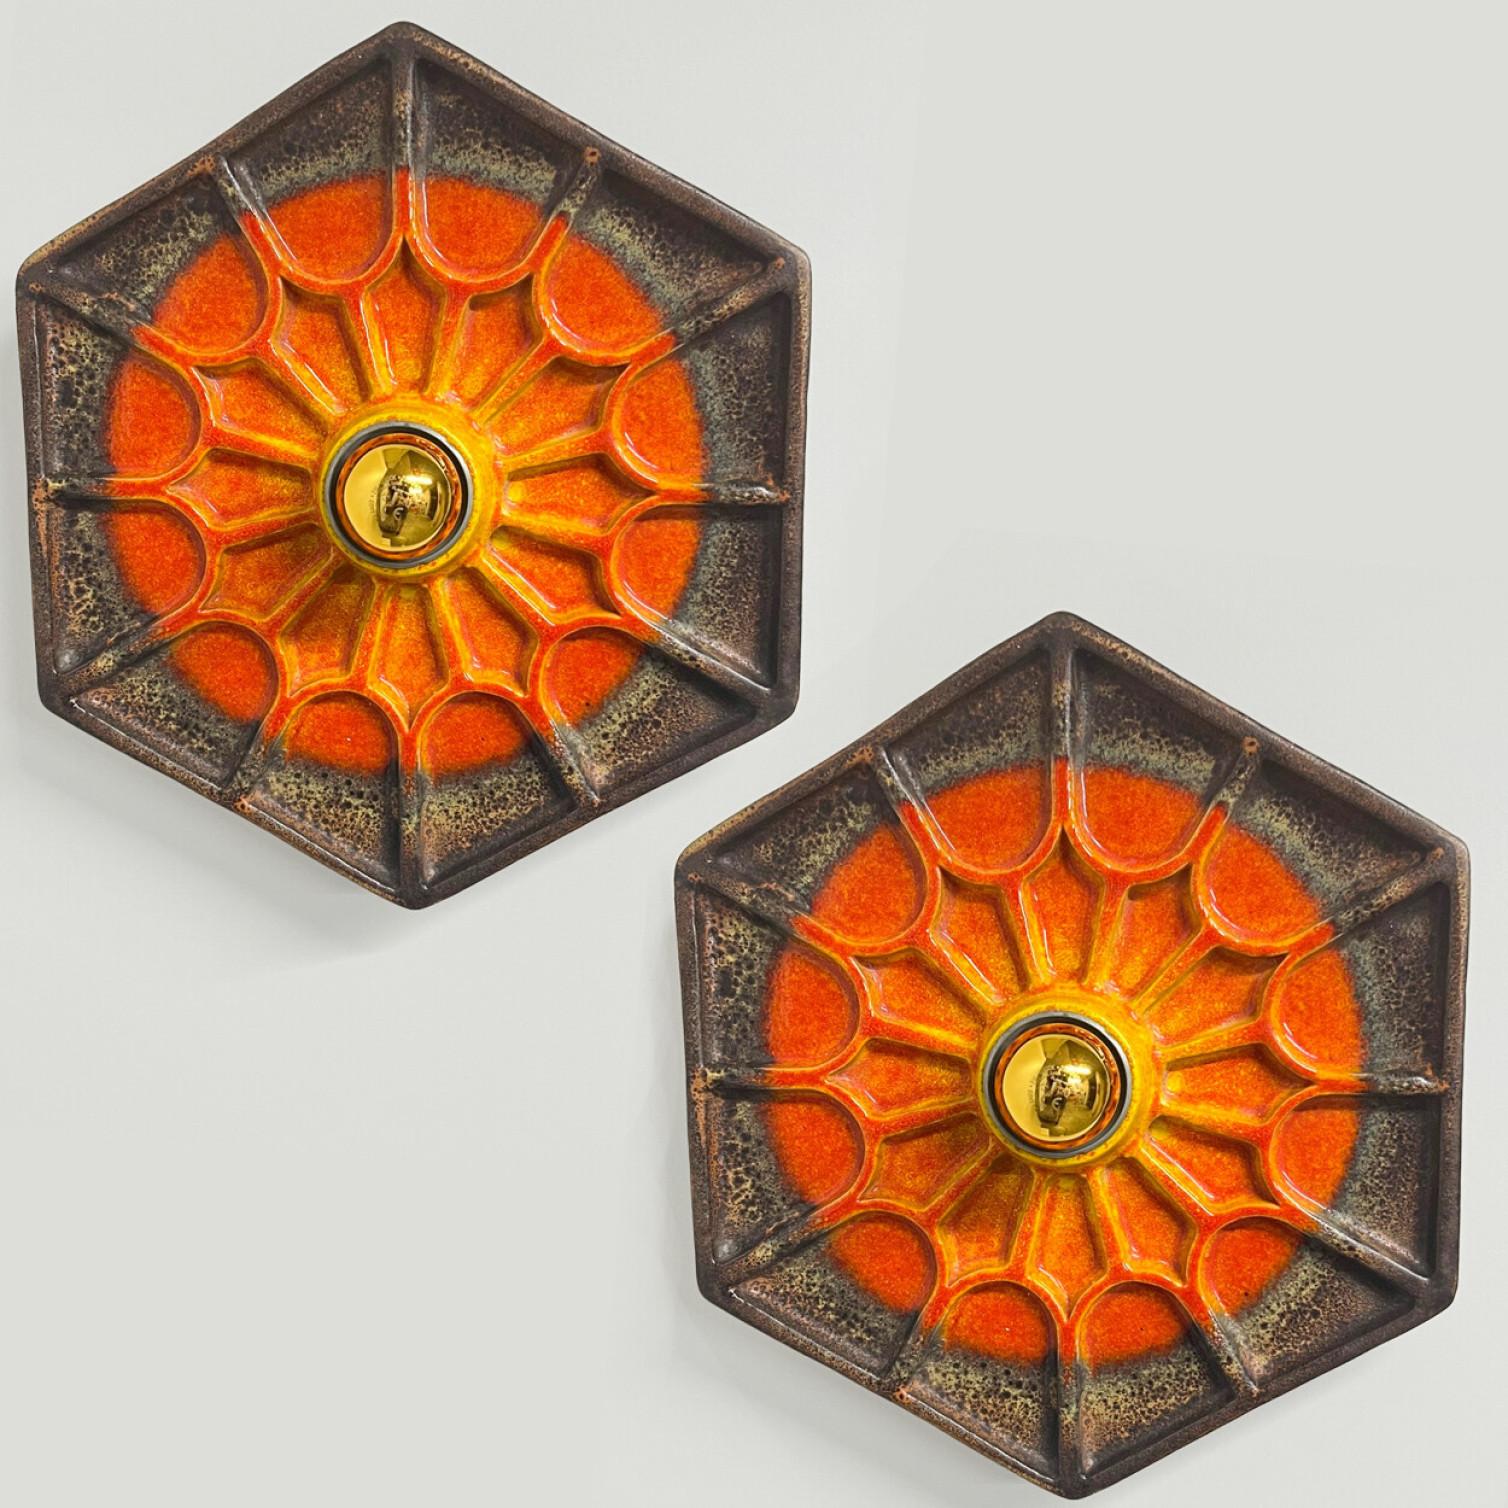 Pair of Orange Hex-shaped Ceramic Wall Lights, Germany, 1970 For Sale 3